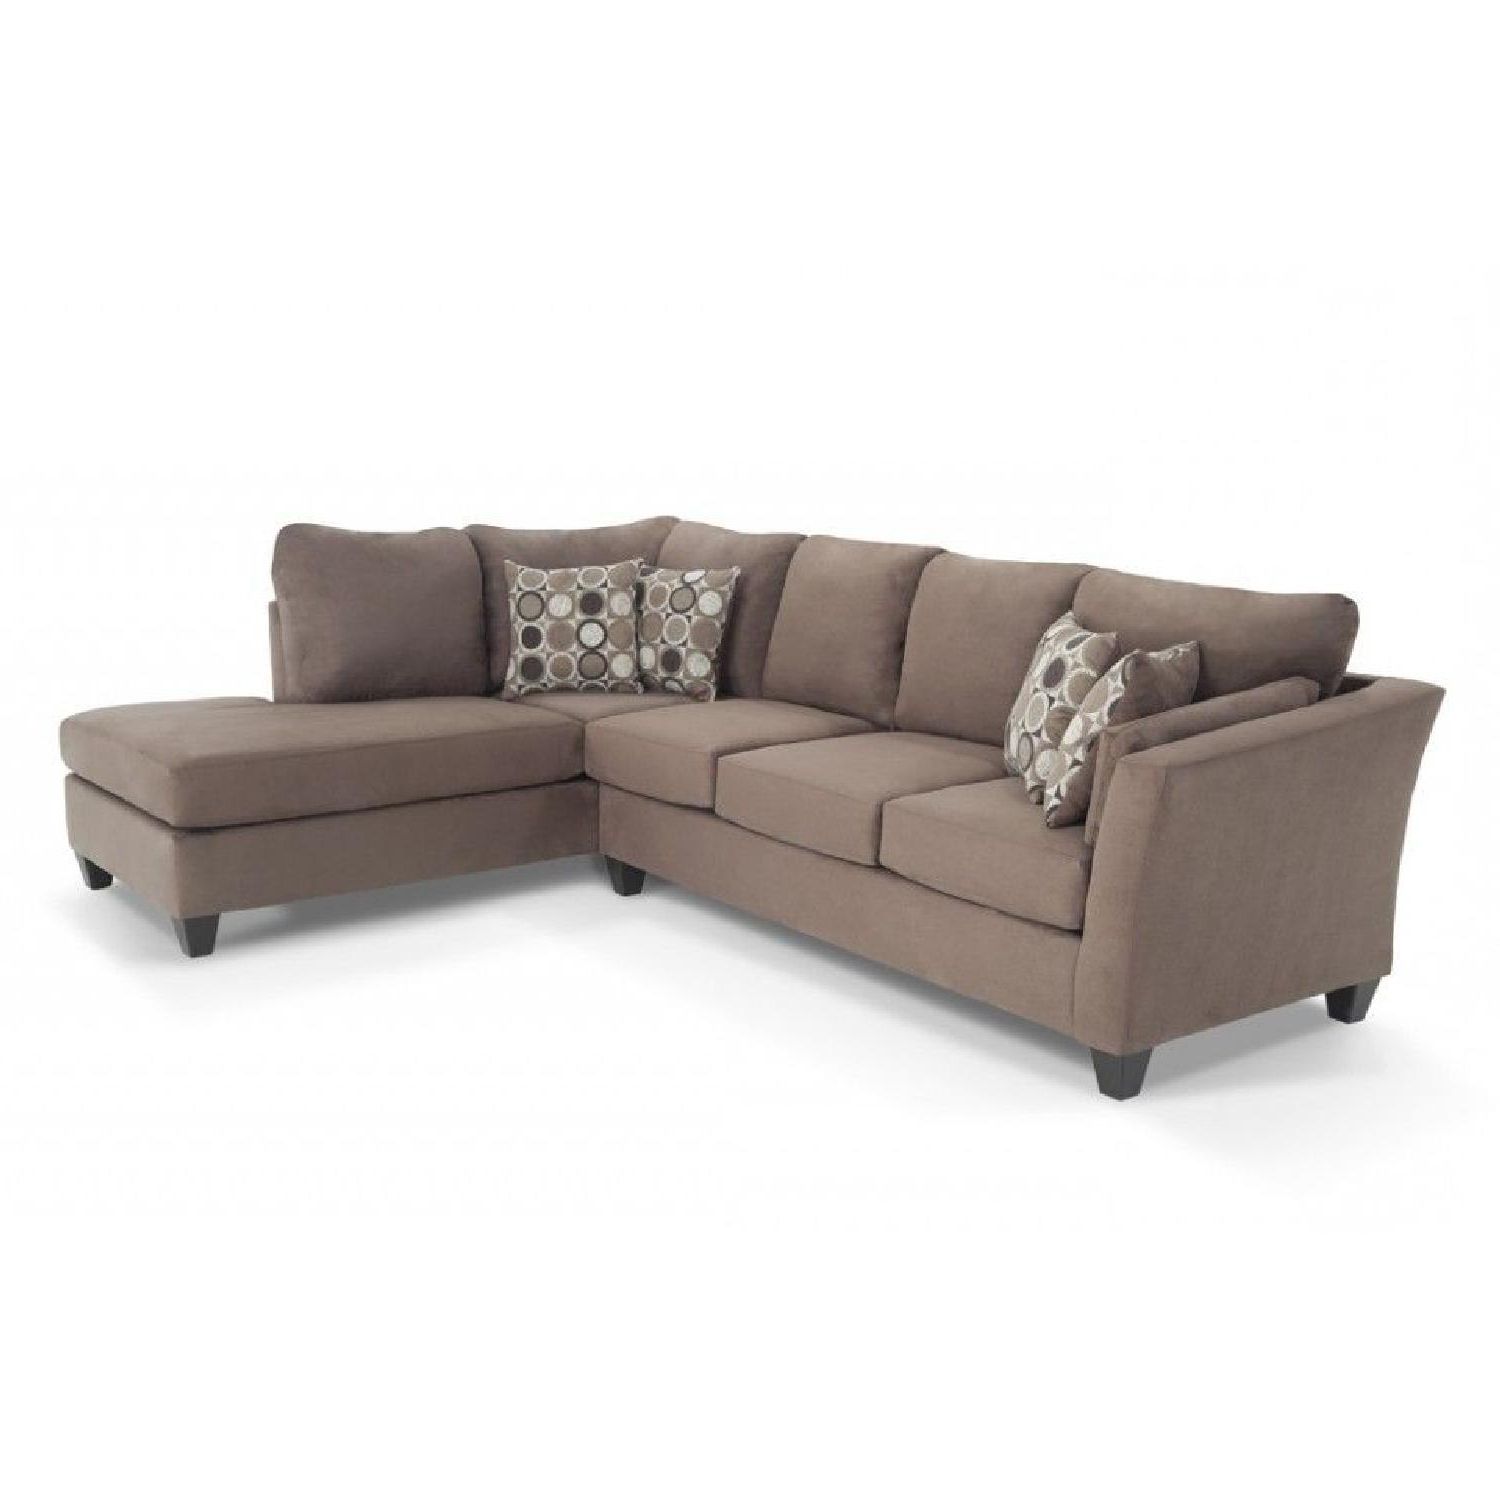 Bob's Libre Ii 2 Piece Left Facing Queen Sleeper Sectional – Aptdeco Within Most Recently Released Left Or Right Facing Sleeper Sectionals (View 9 of 15)